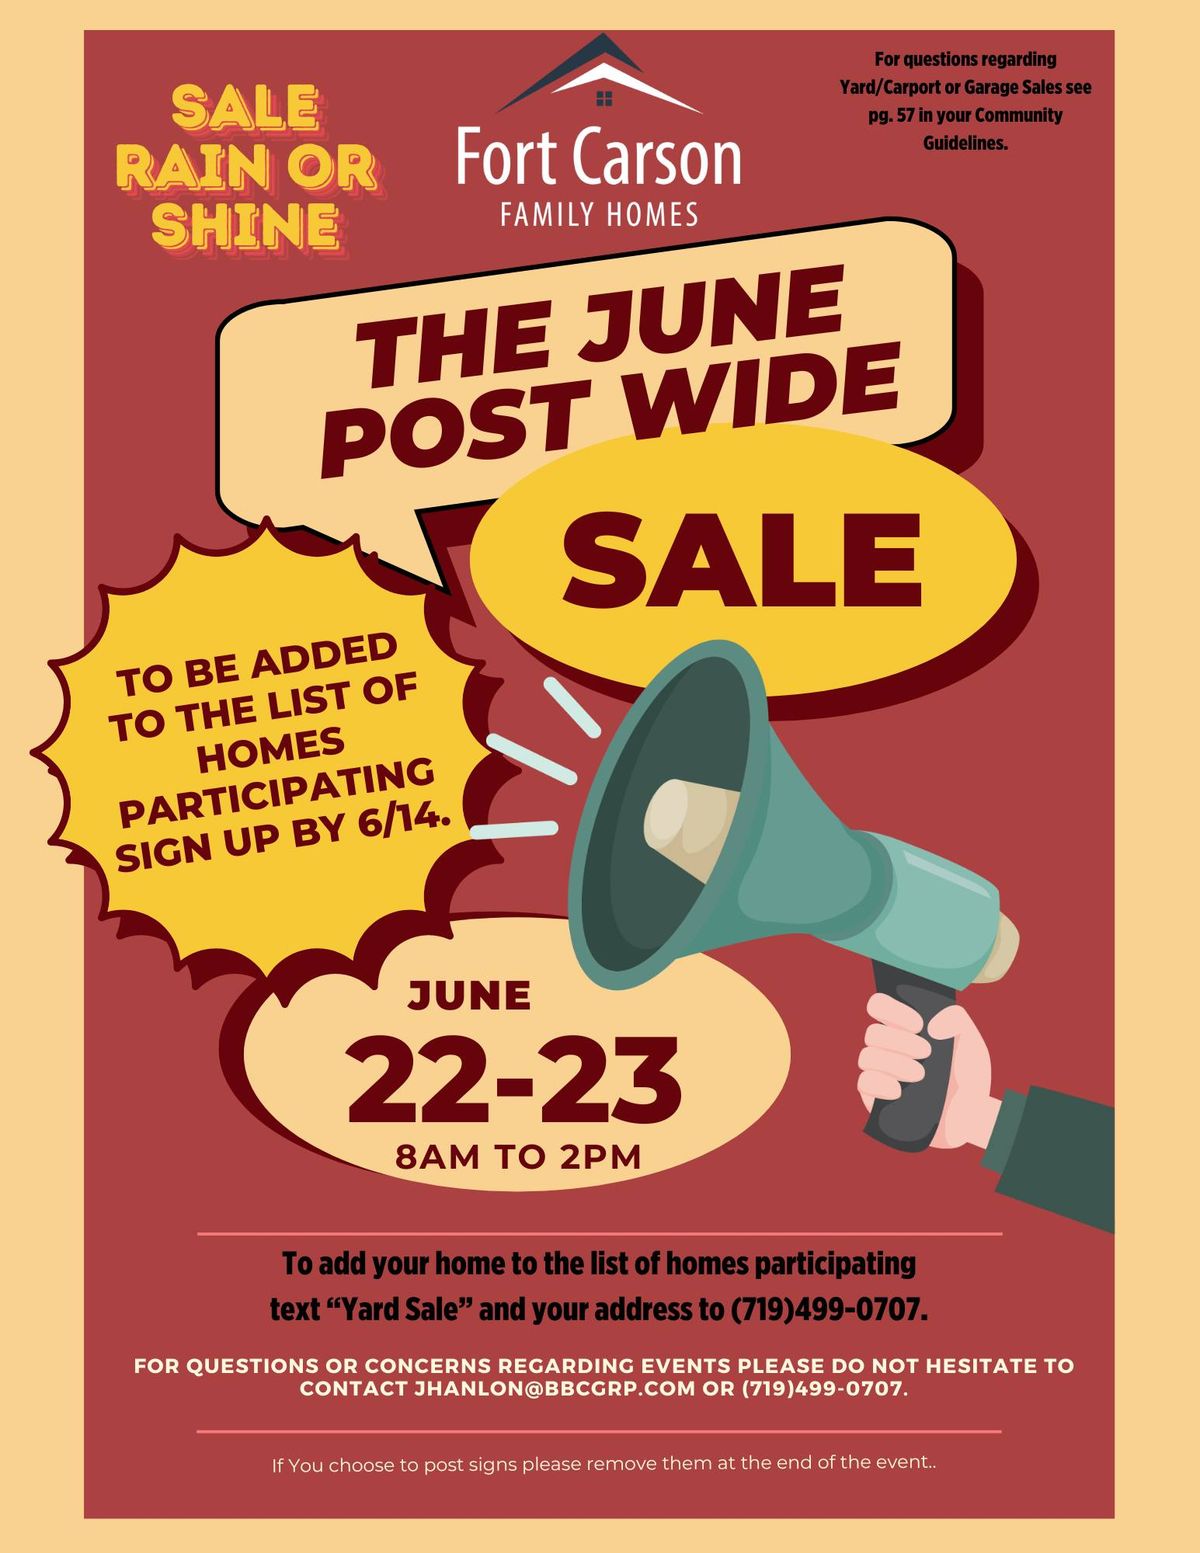 The June Post Wide Yard Sale